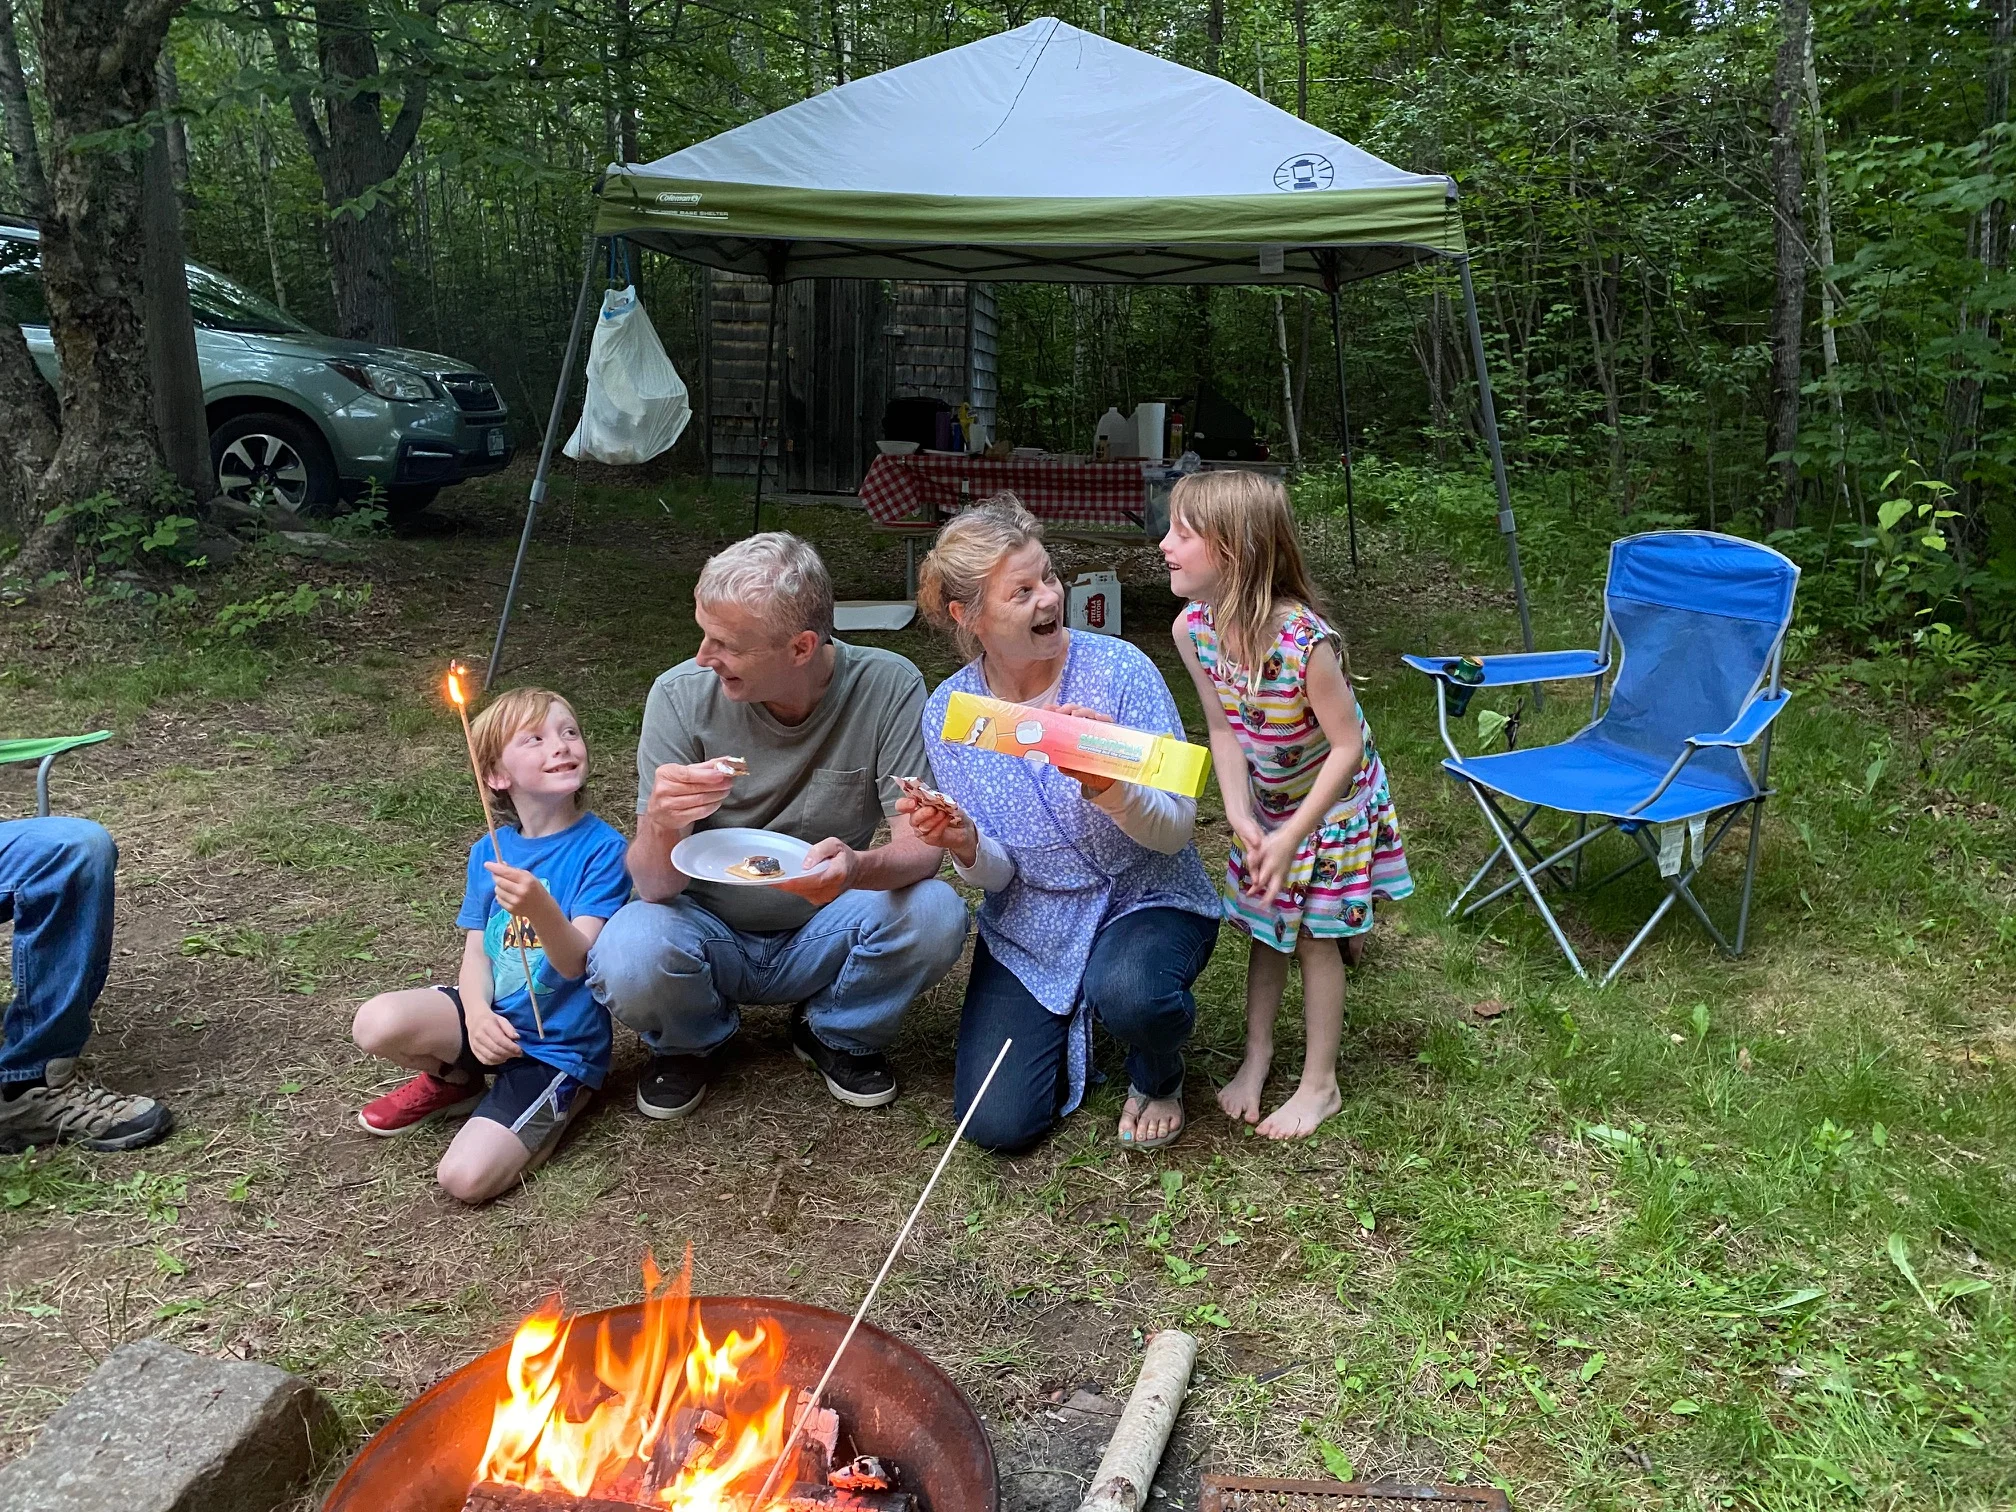 Owner and family roasting marshmallows by campfire